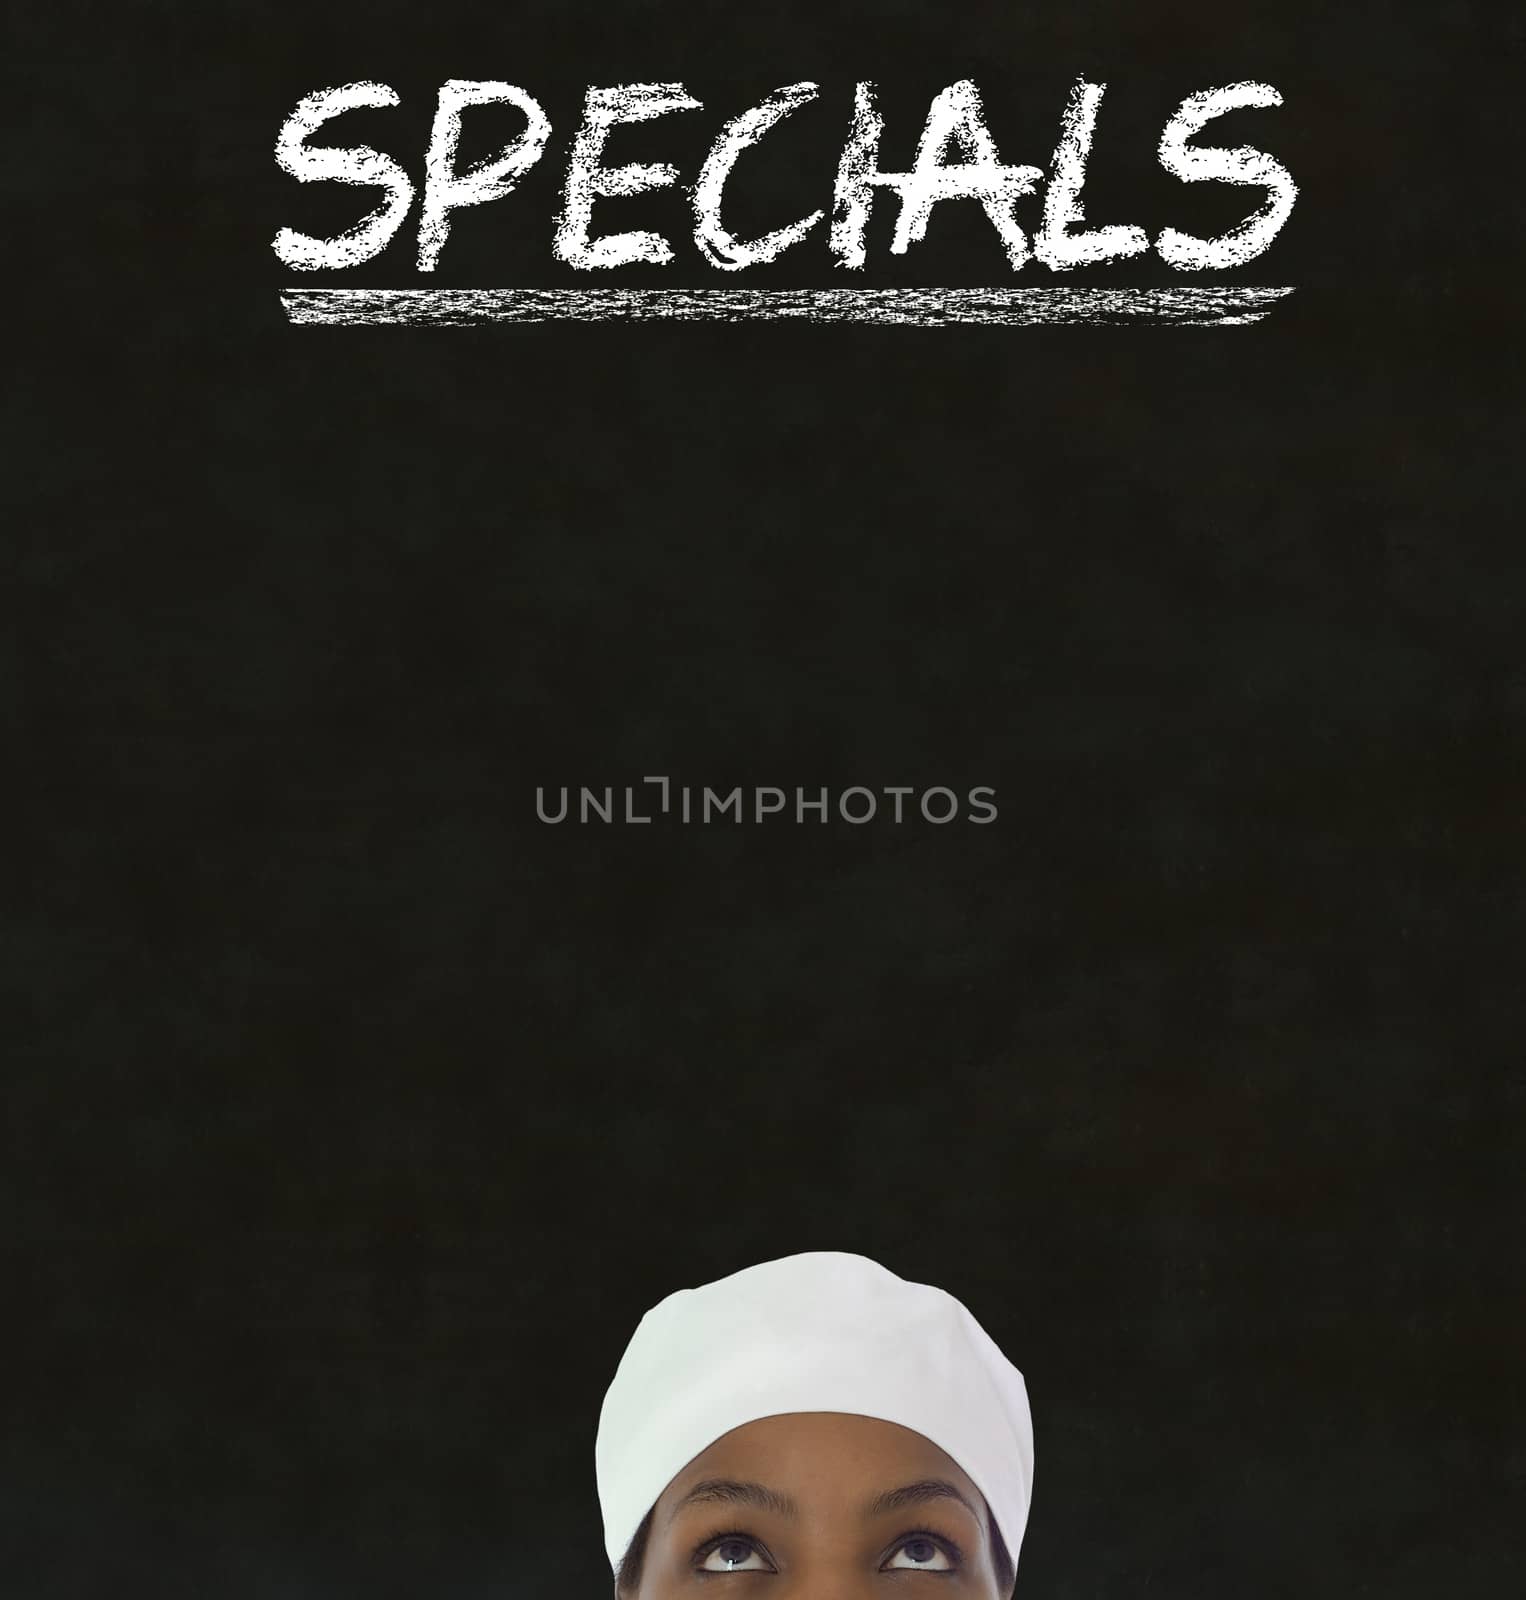 African American woman chef thinking with chalk specials sign on blackboard Background